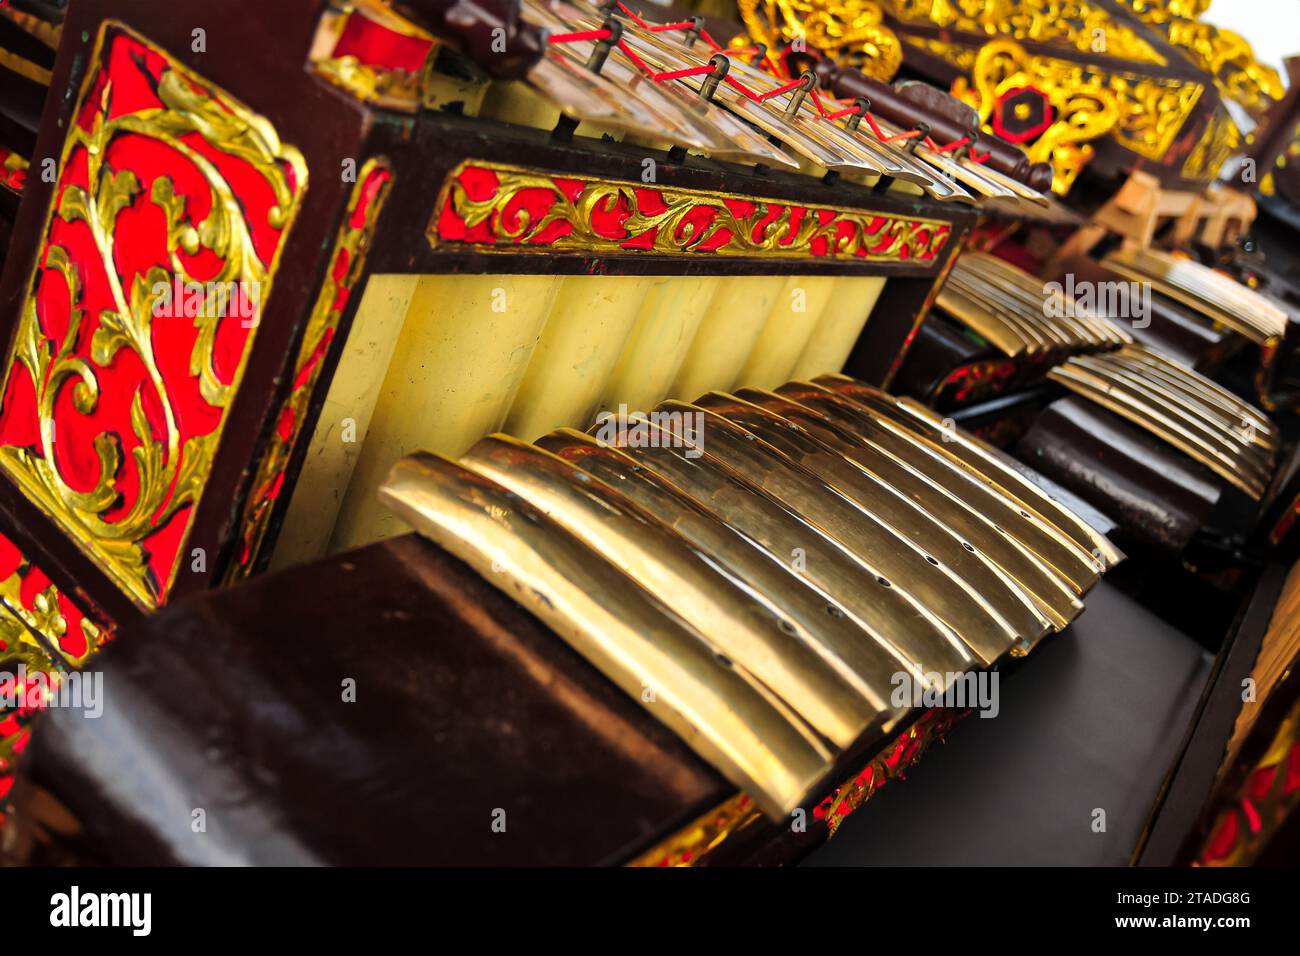 Gamelan is a traditional percussion musical instrument from Java, Indonesia made from brass plates lined up to form notes Stock Photo